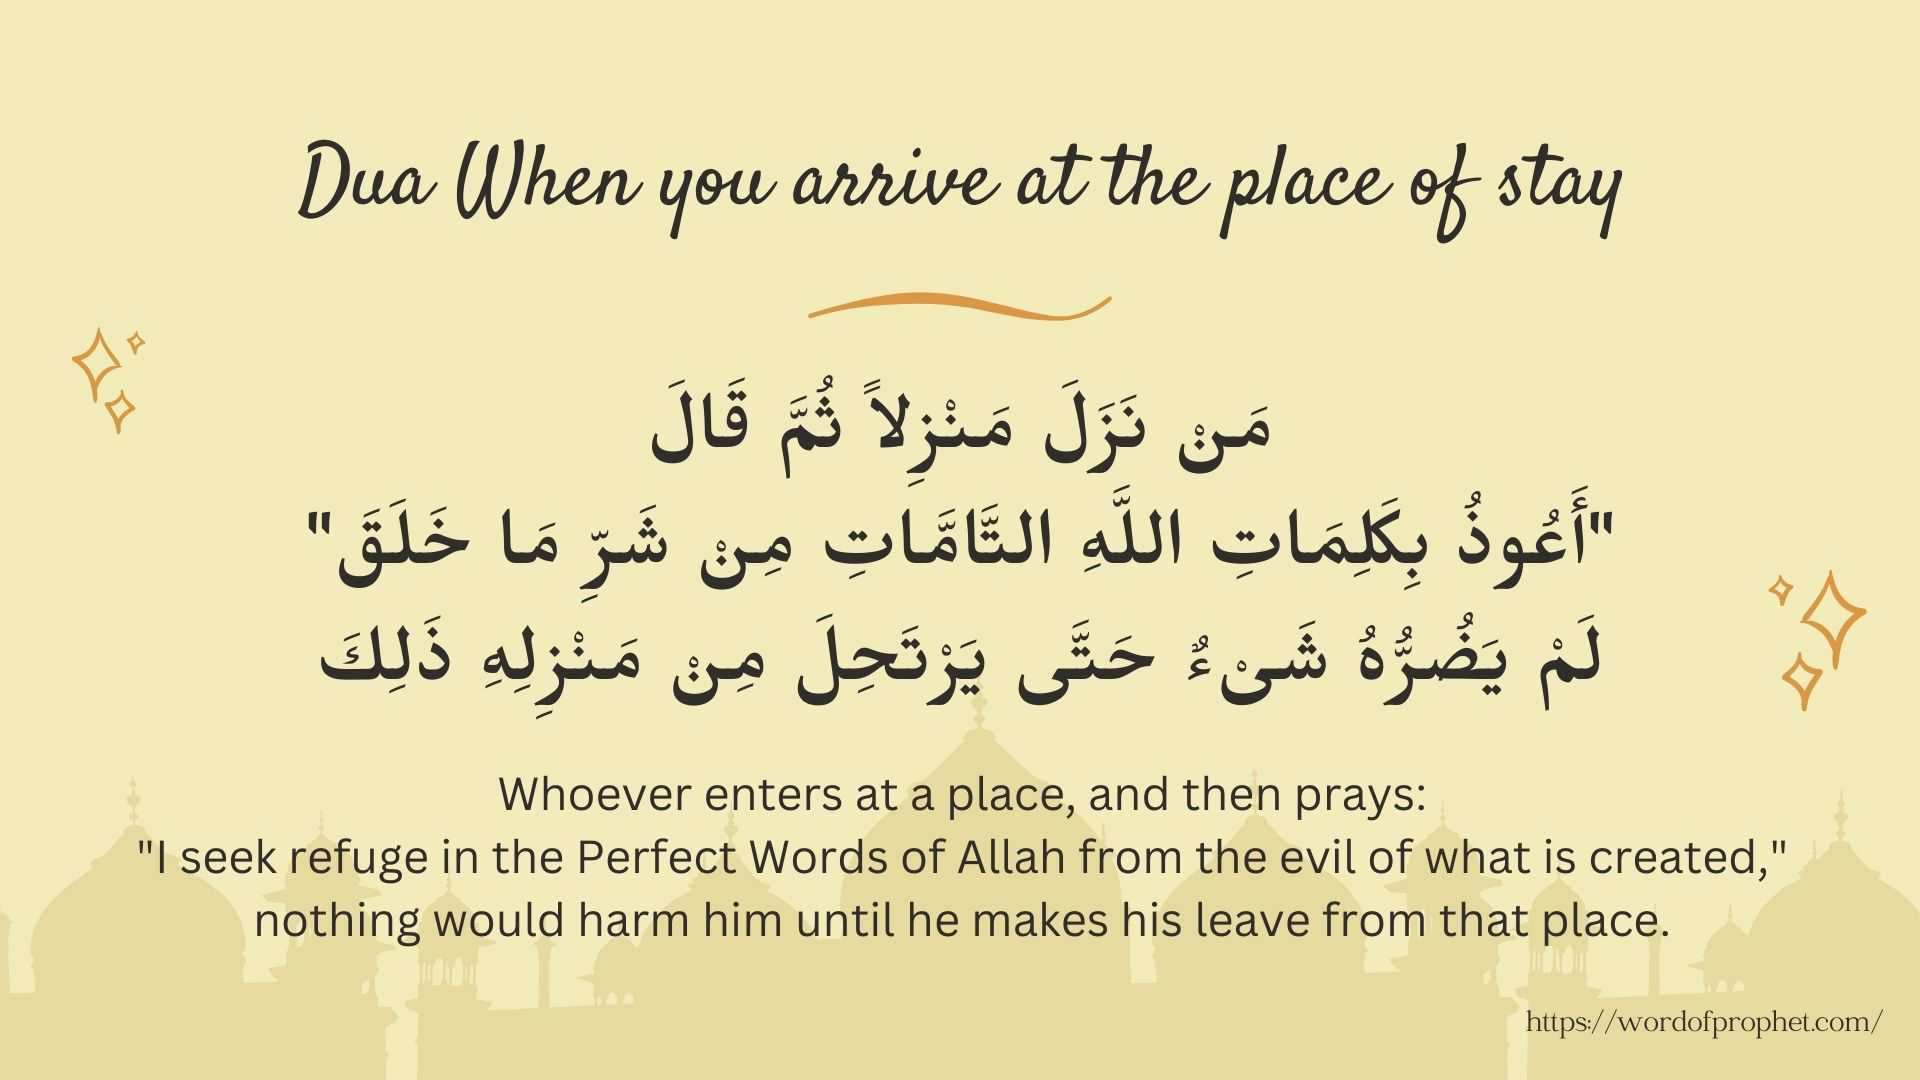 Dua When you arrive at the place of stay